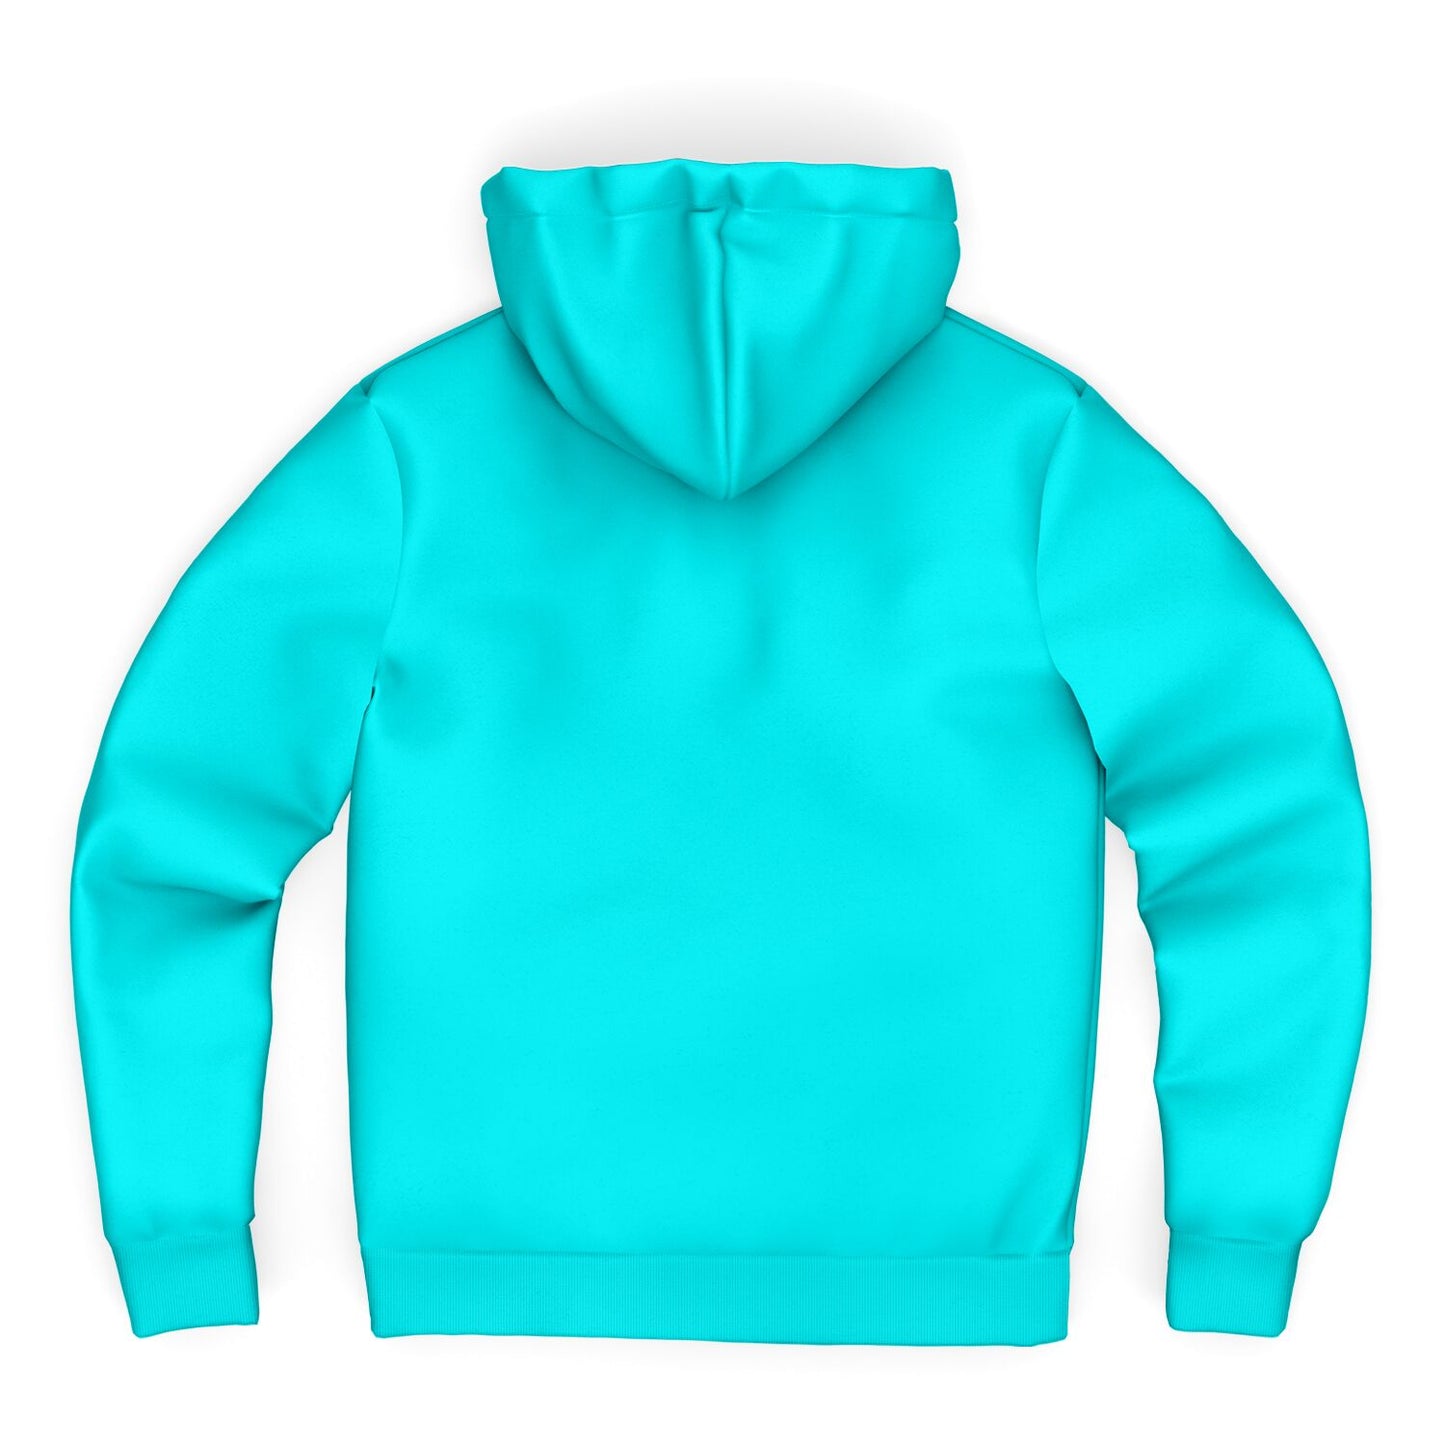 Teal Promise UNISEX Zip Up Youth Coat (Husky Fit)